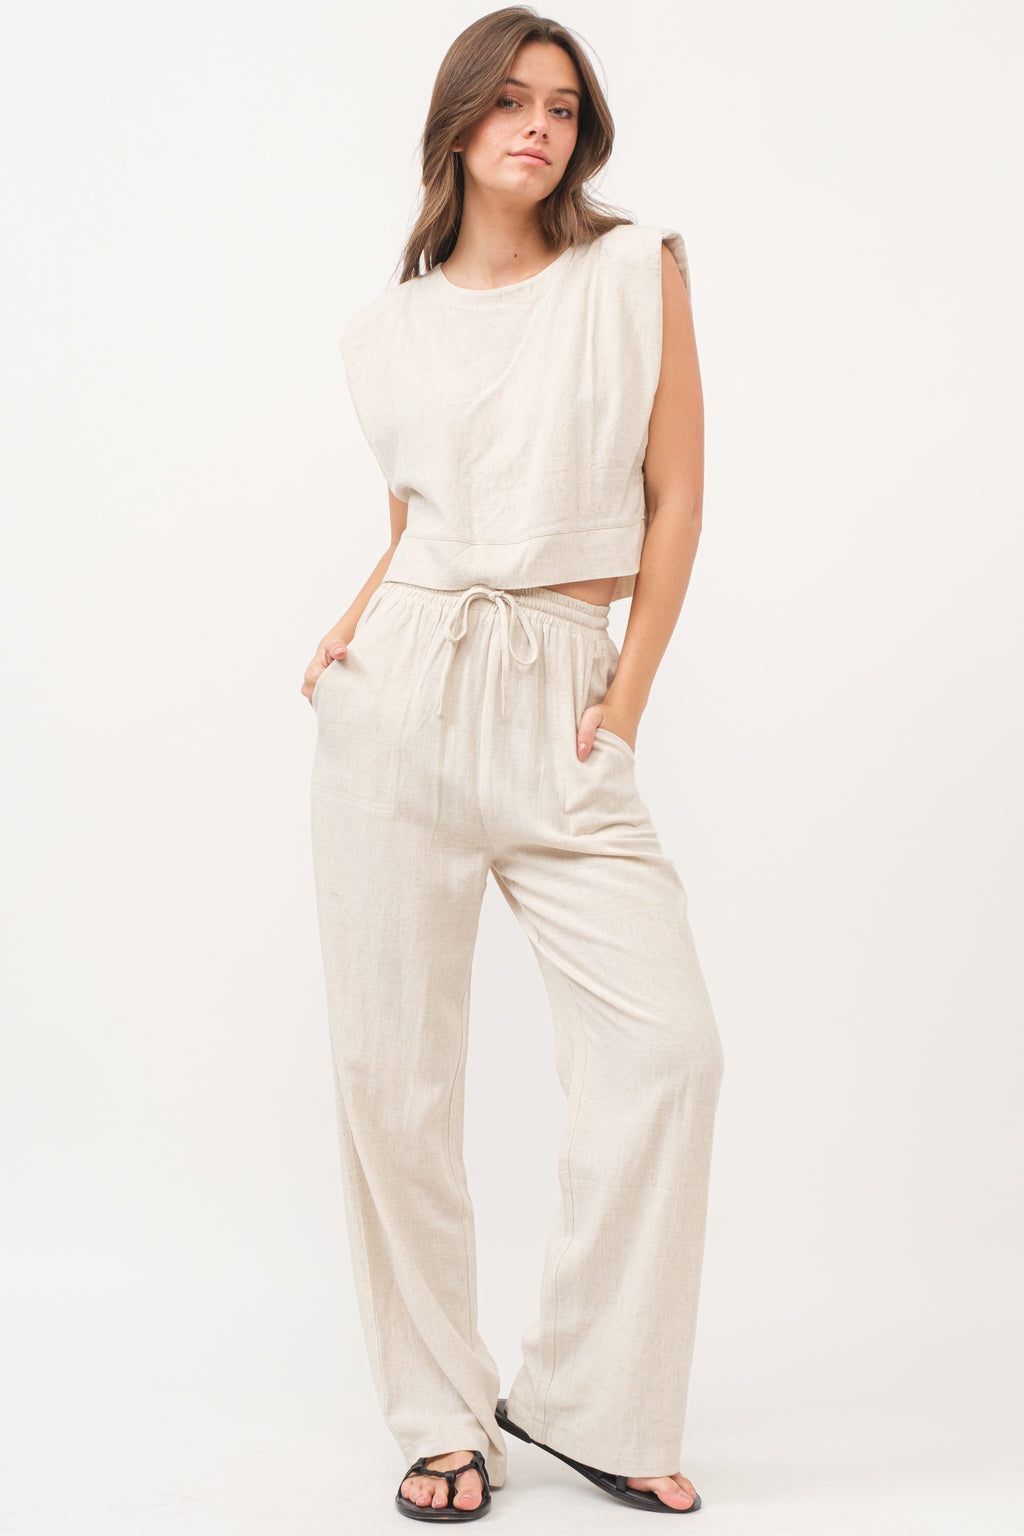 The Strand Linen Two Piece Set in Oat